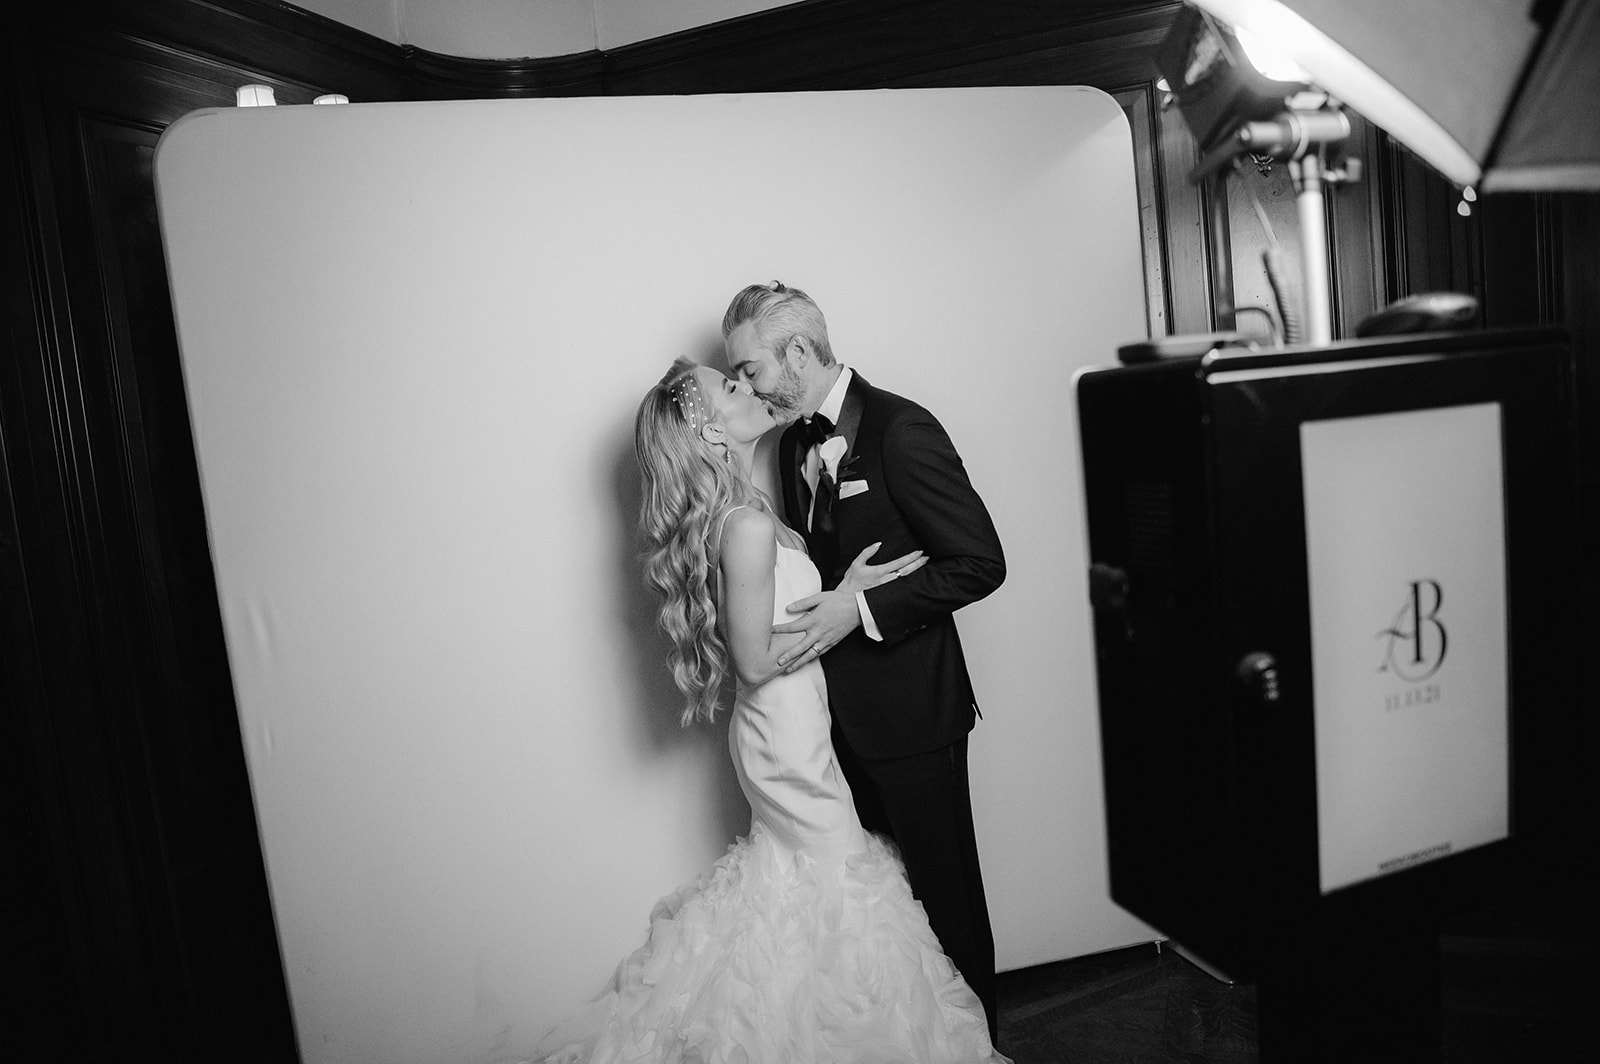 Bride and groom taking a photo booth photo